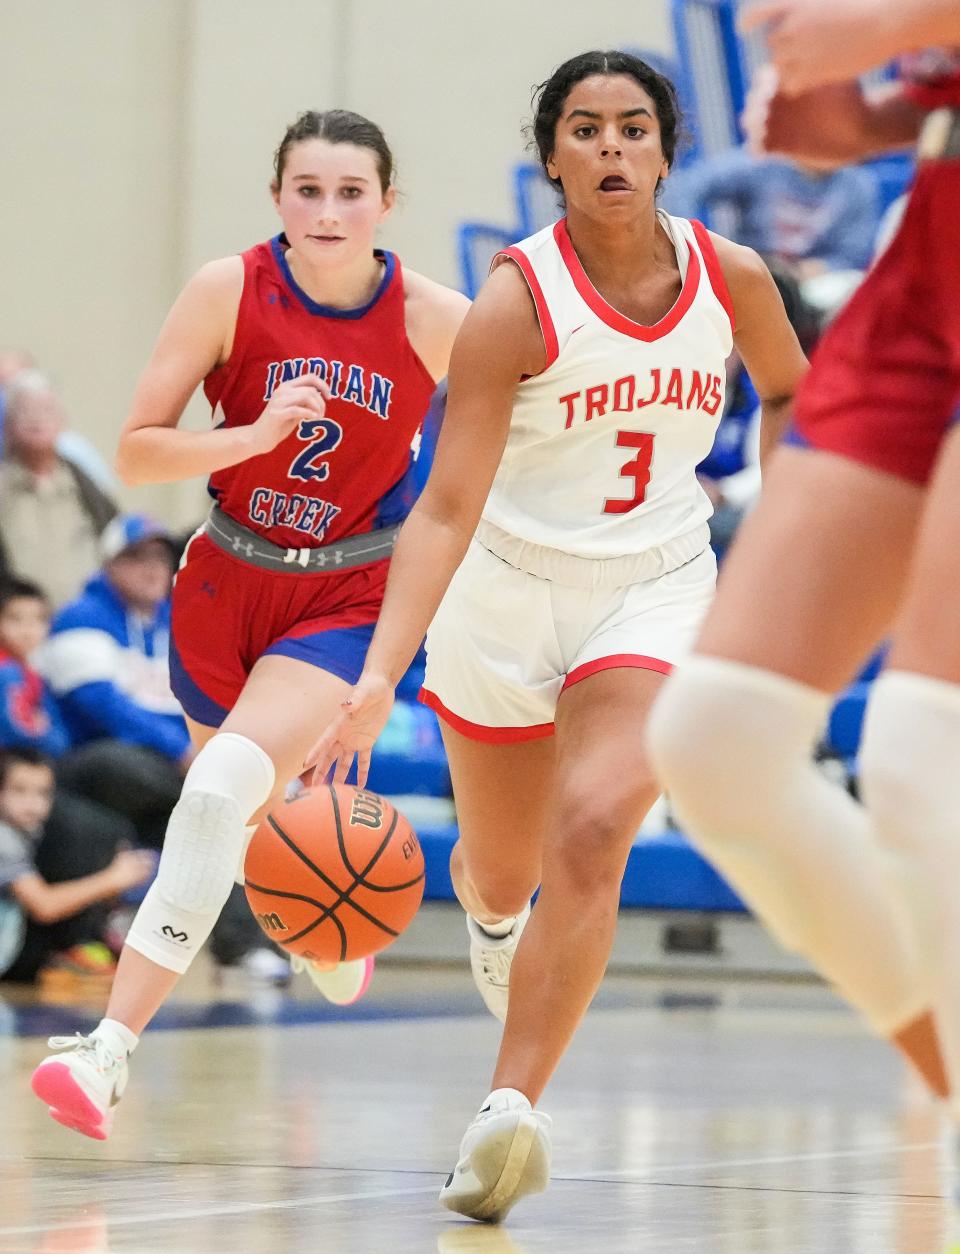 Center Grove Trojans Aubrie Booker (3) rushes up the court Thursday, Nov. 16, 2023, during the semifinals of the Johnson County Tournament at Franklin Community High School in Franklin. The Center Grove Trojans defeated Indian Creek, 61-52.